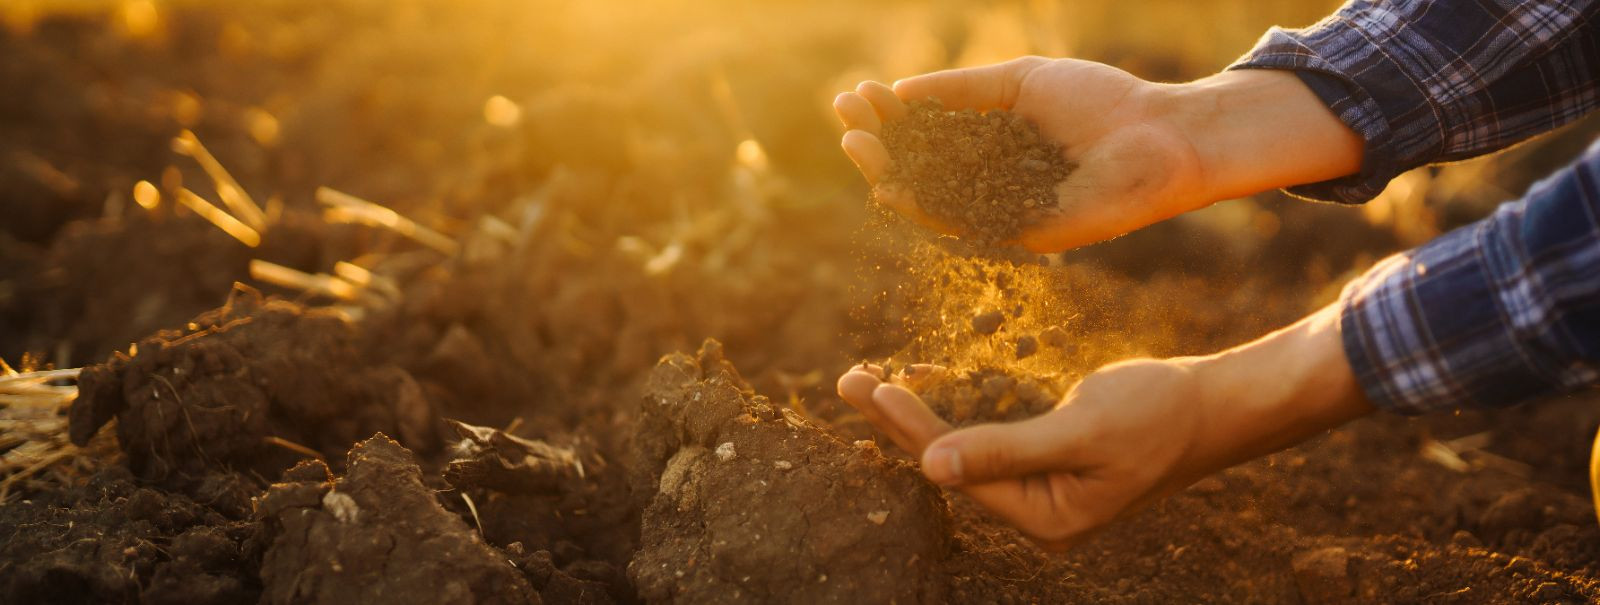 Soil health is the continued capacity of soil to function as a vital living ecosystem that sustains plants, animals, and humans. It's a state where soil can mai